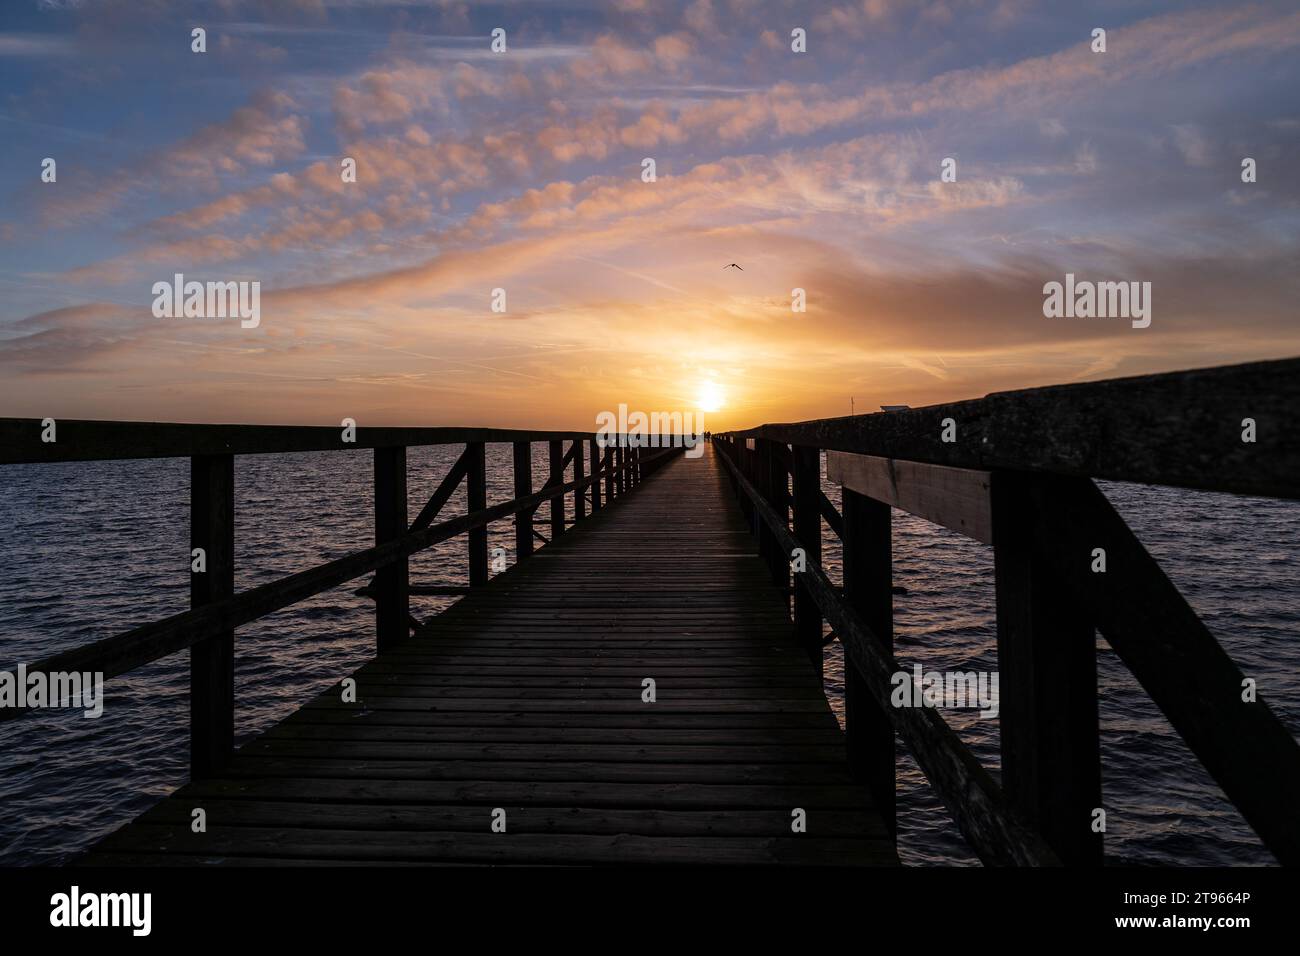 A scenic view of a pier at sunset in Bjarred, Sweden Stock Photo